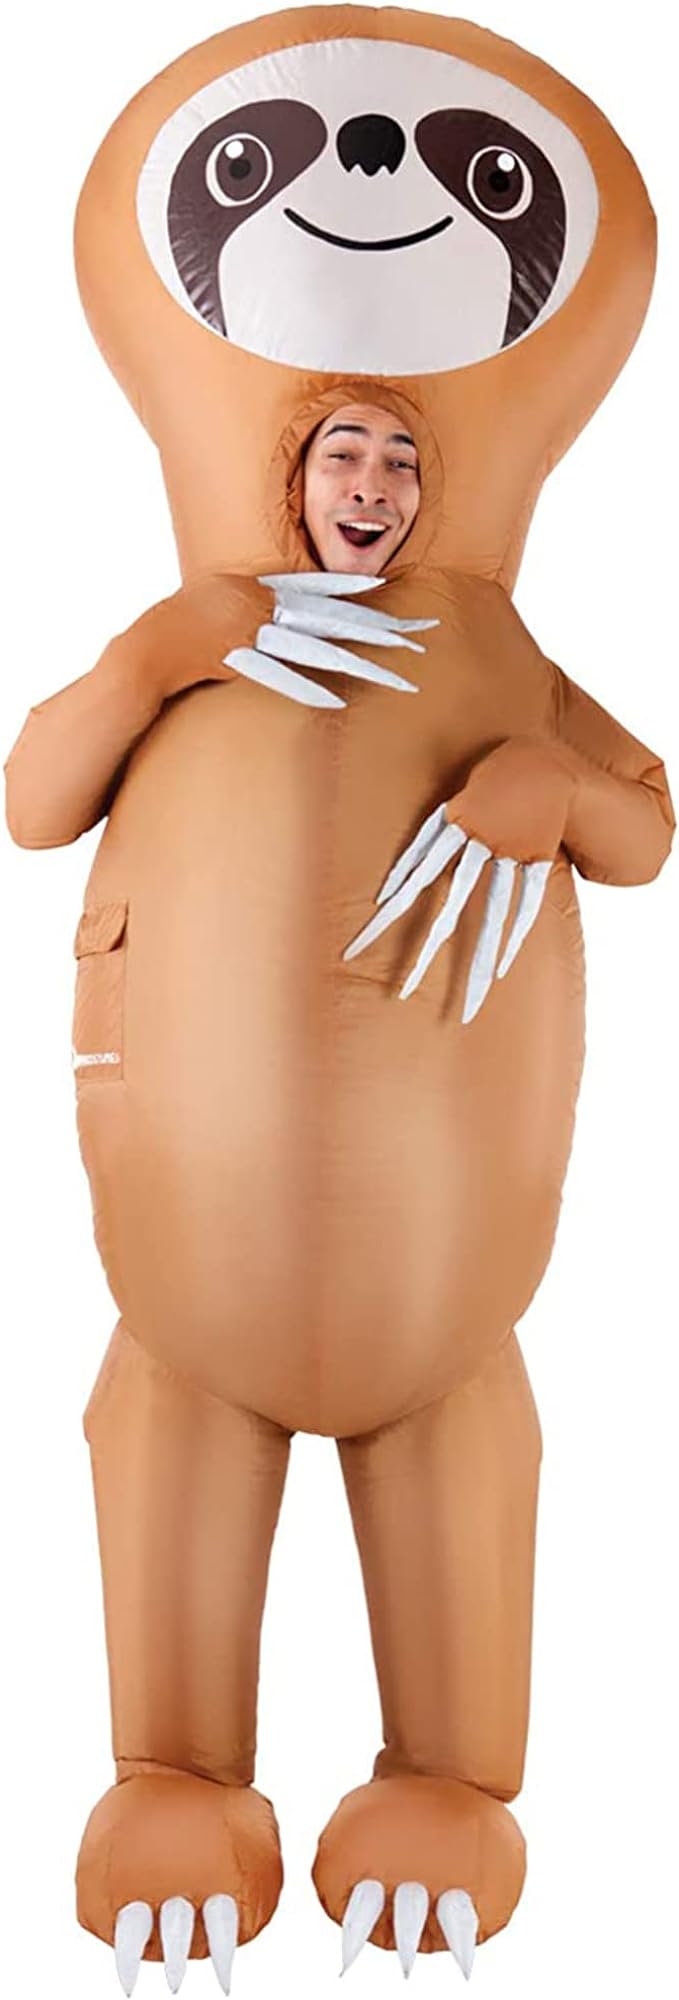 Man wearing brown inflatable sloth costume